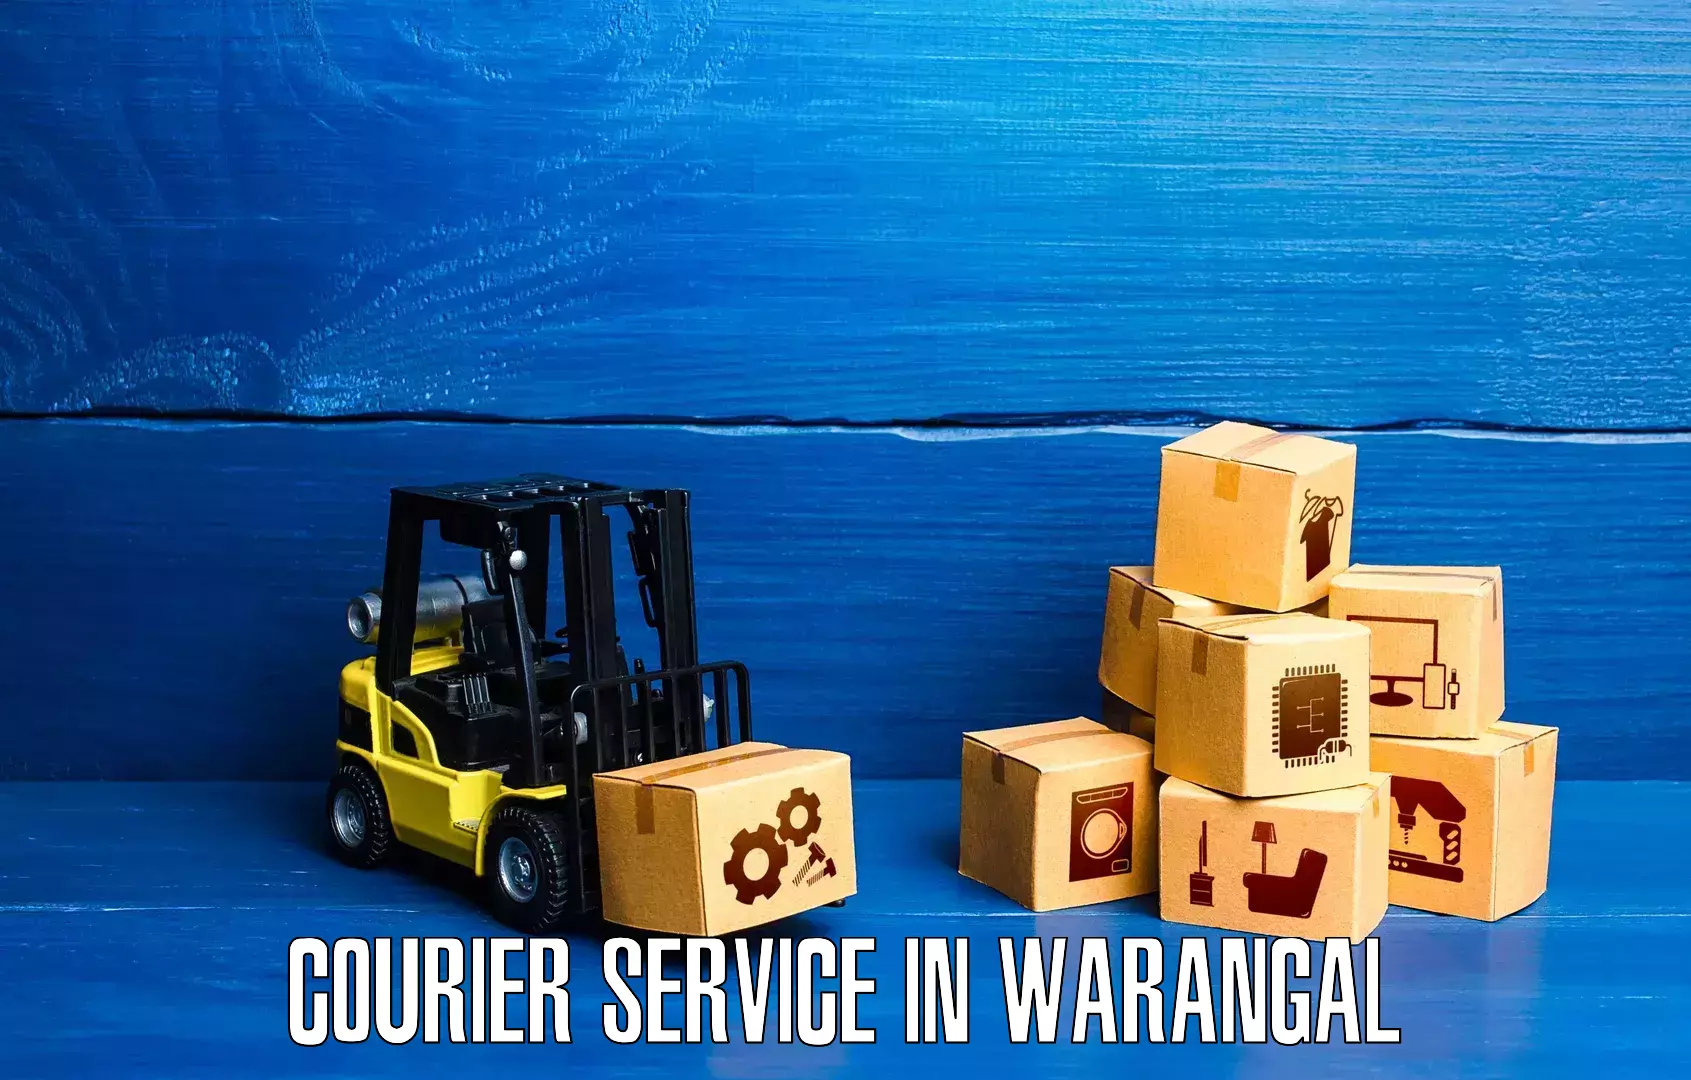 Innovative shipping solutions in Warangal